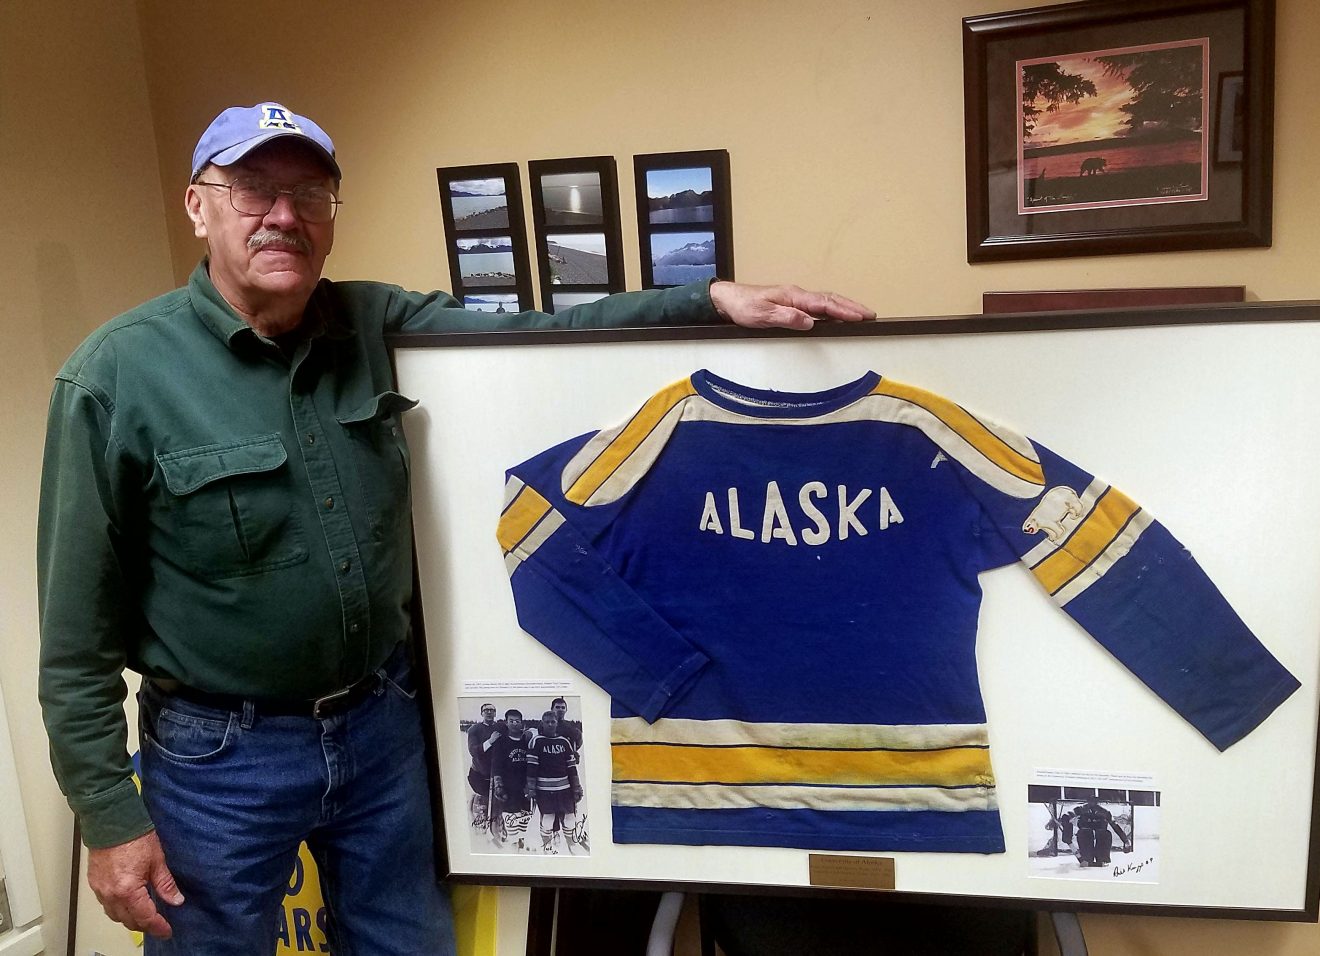 Old sweater leads to a journey through UAF hockey history